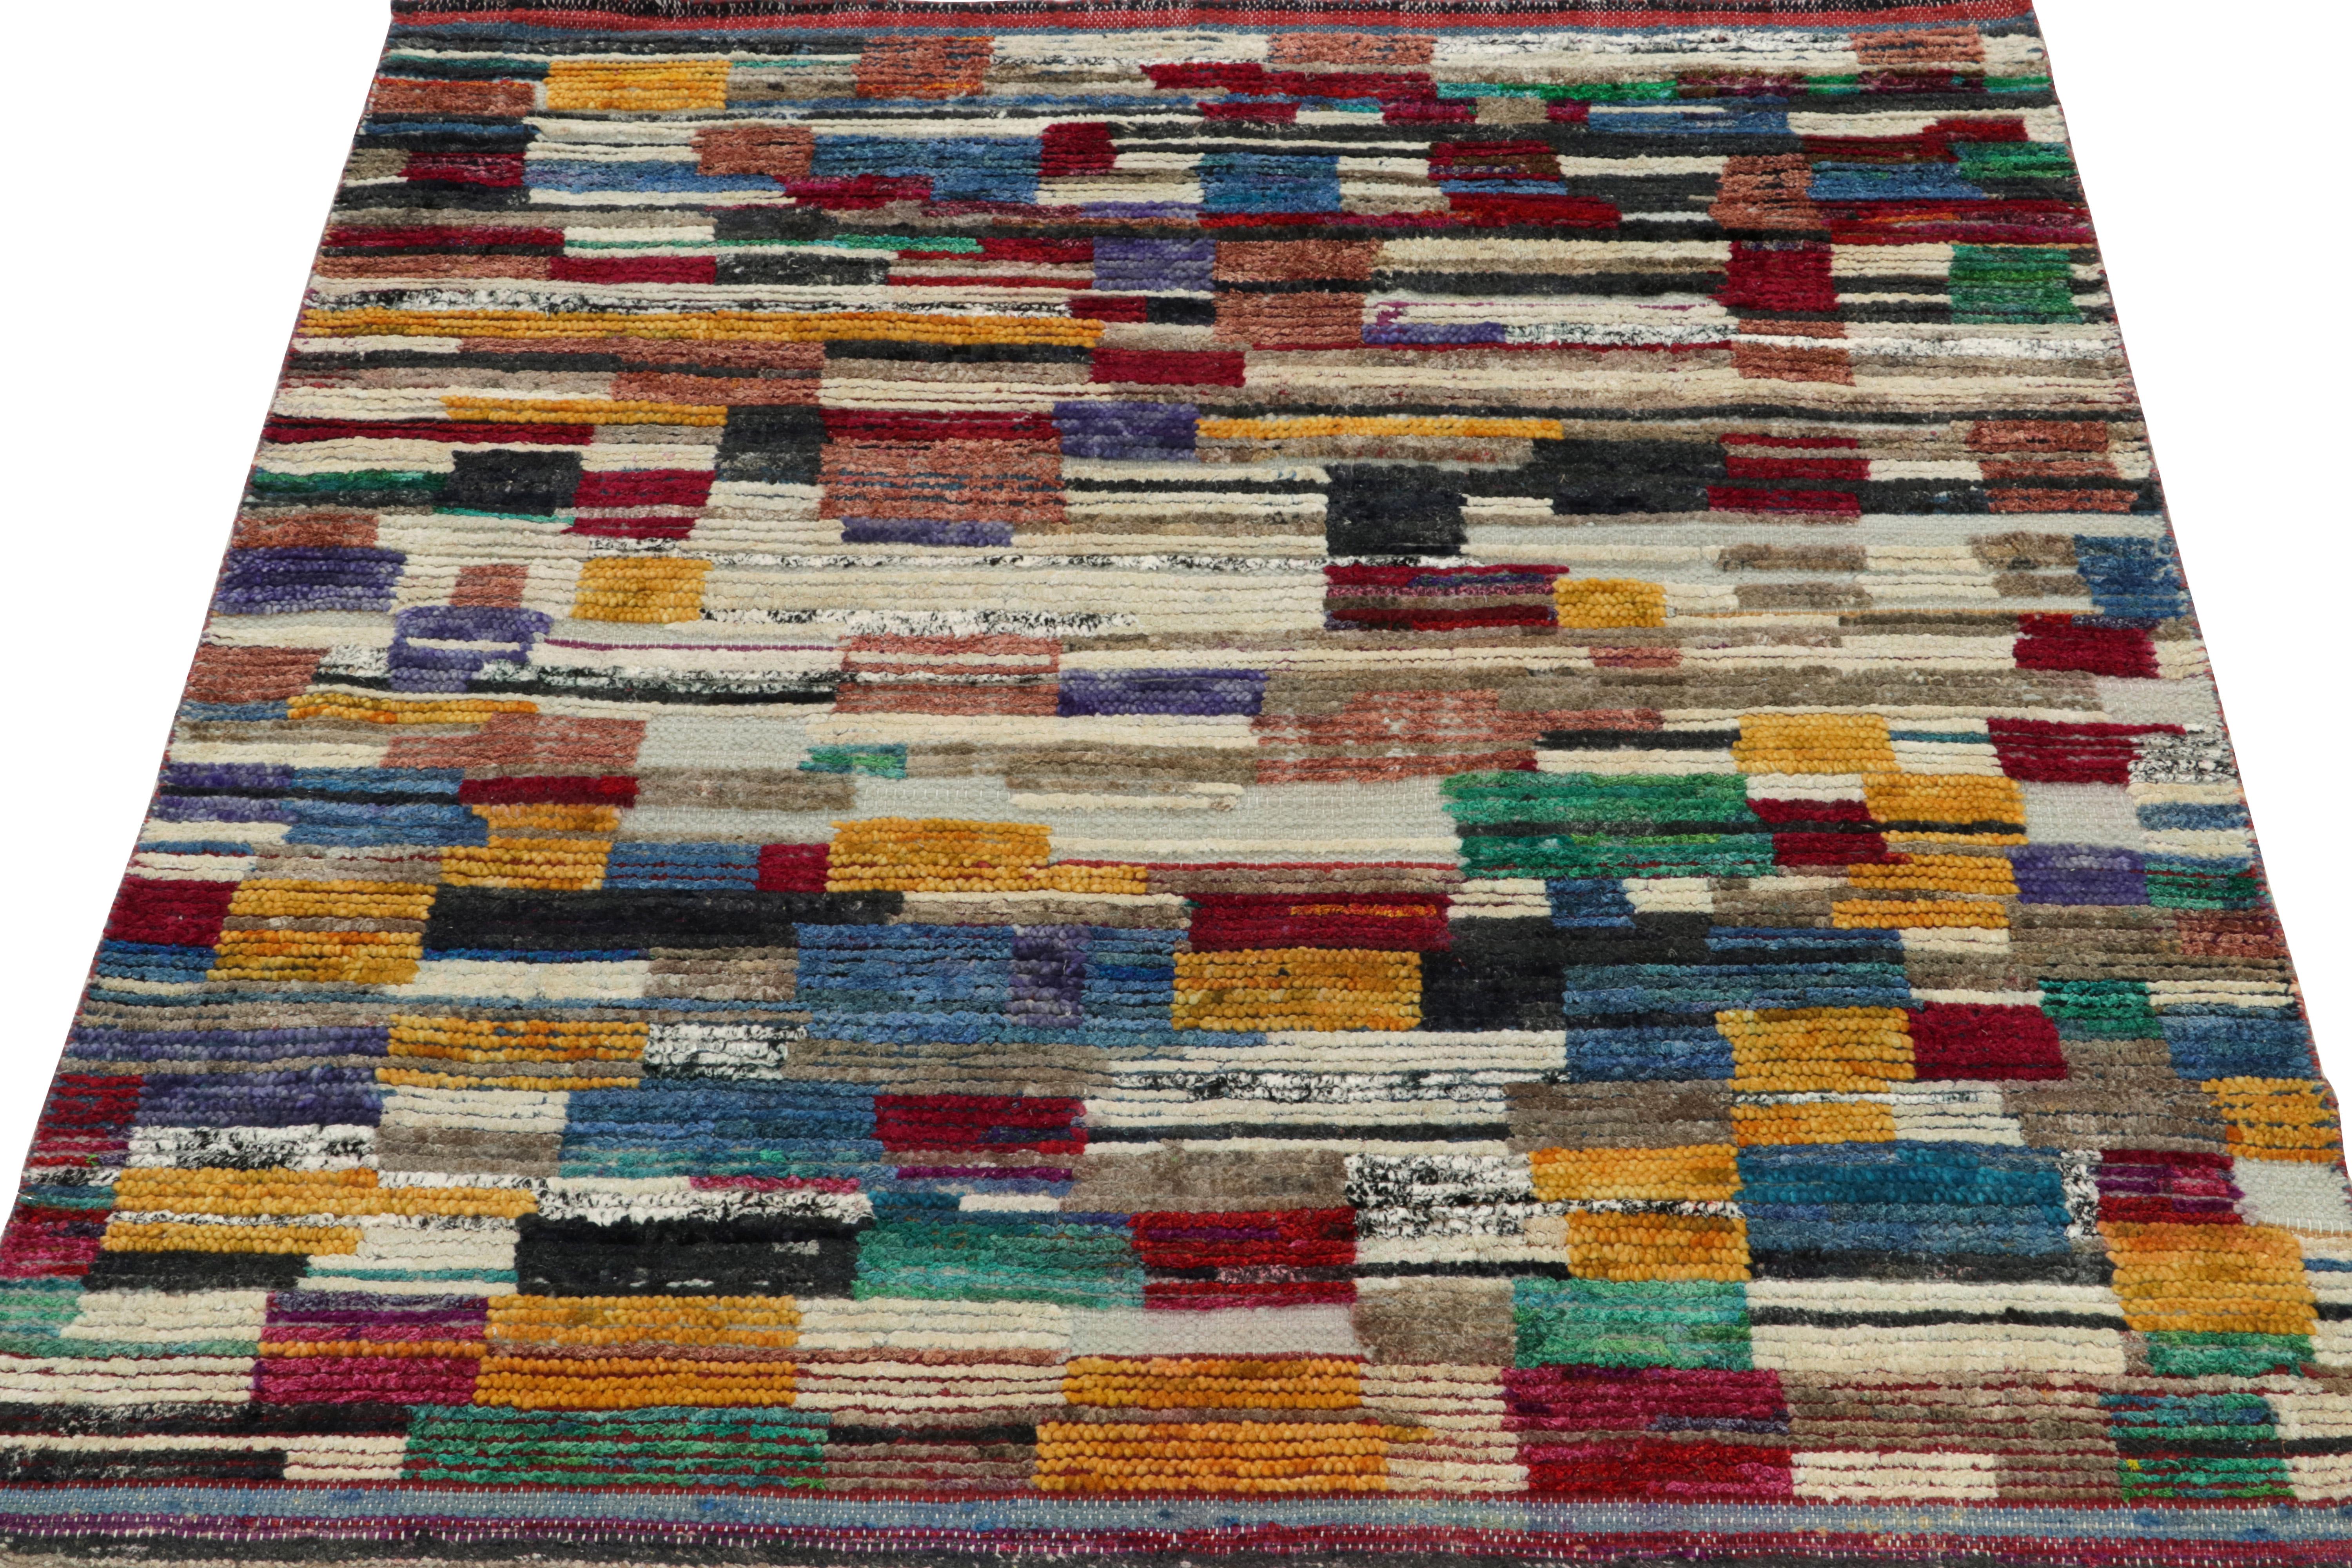 Rug & Kilim’s inventive tribute to Moroccan rug design, connoting an enticing play of variegated shades of gold, scarlet red, blue, white & green blending seamlessly to conclude to a multicolor striated border. Hand-knotted in silk, a 4x5 rug from